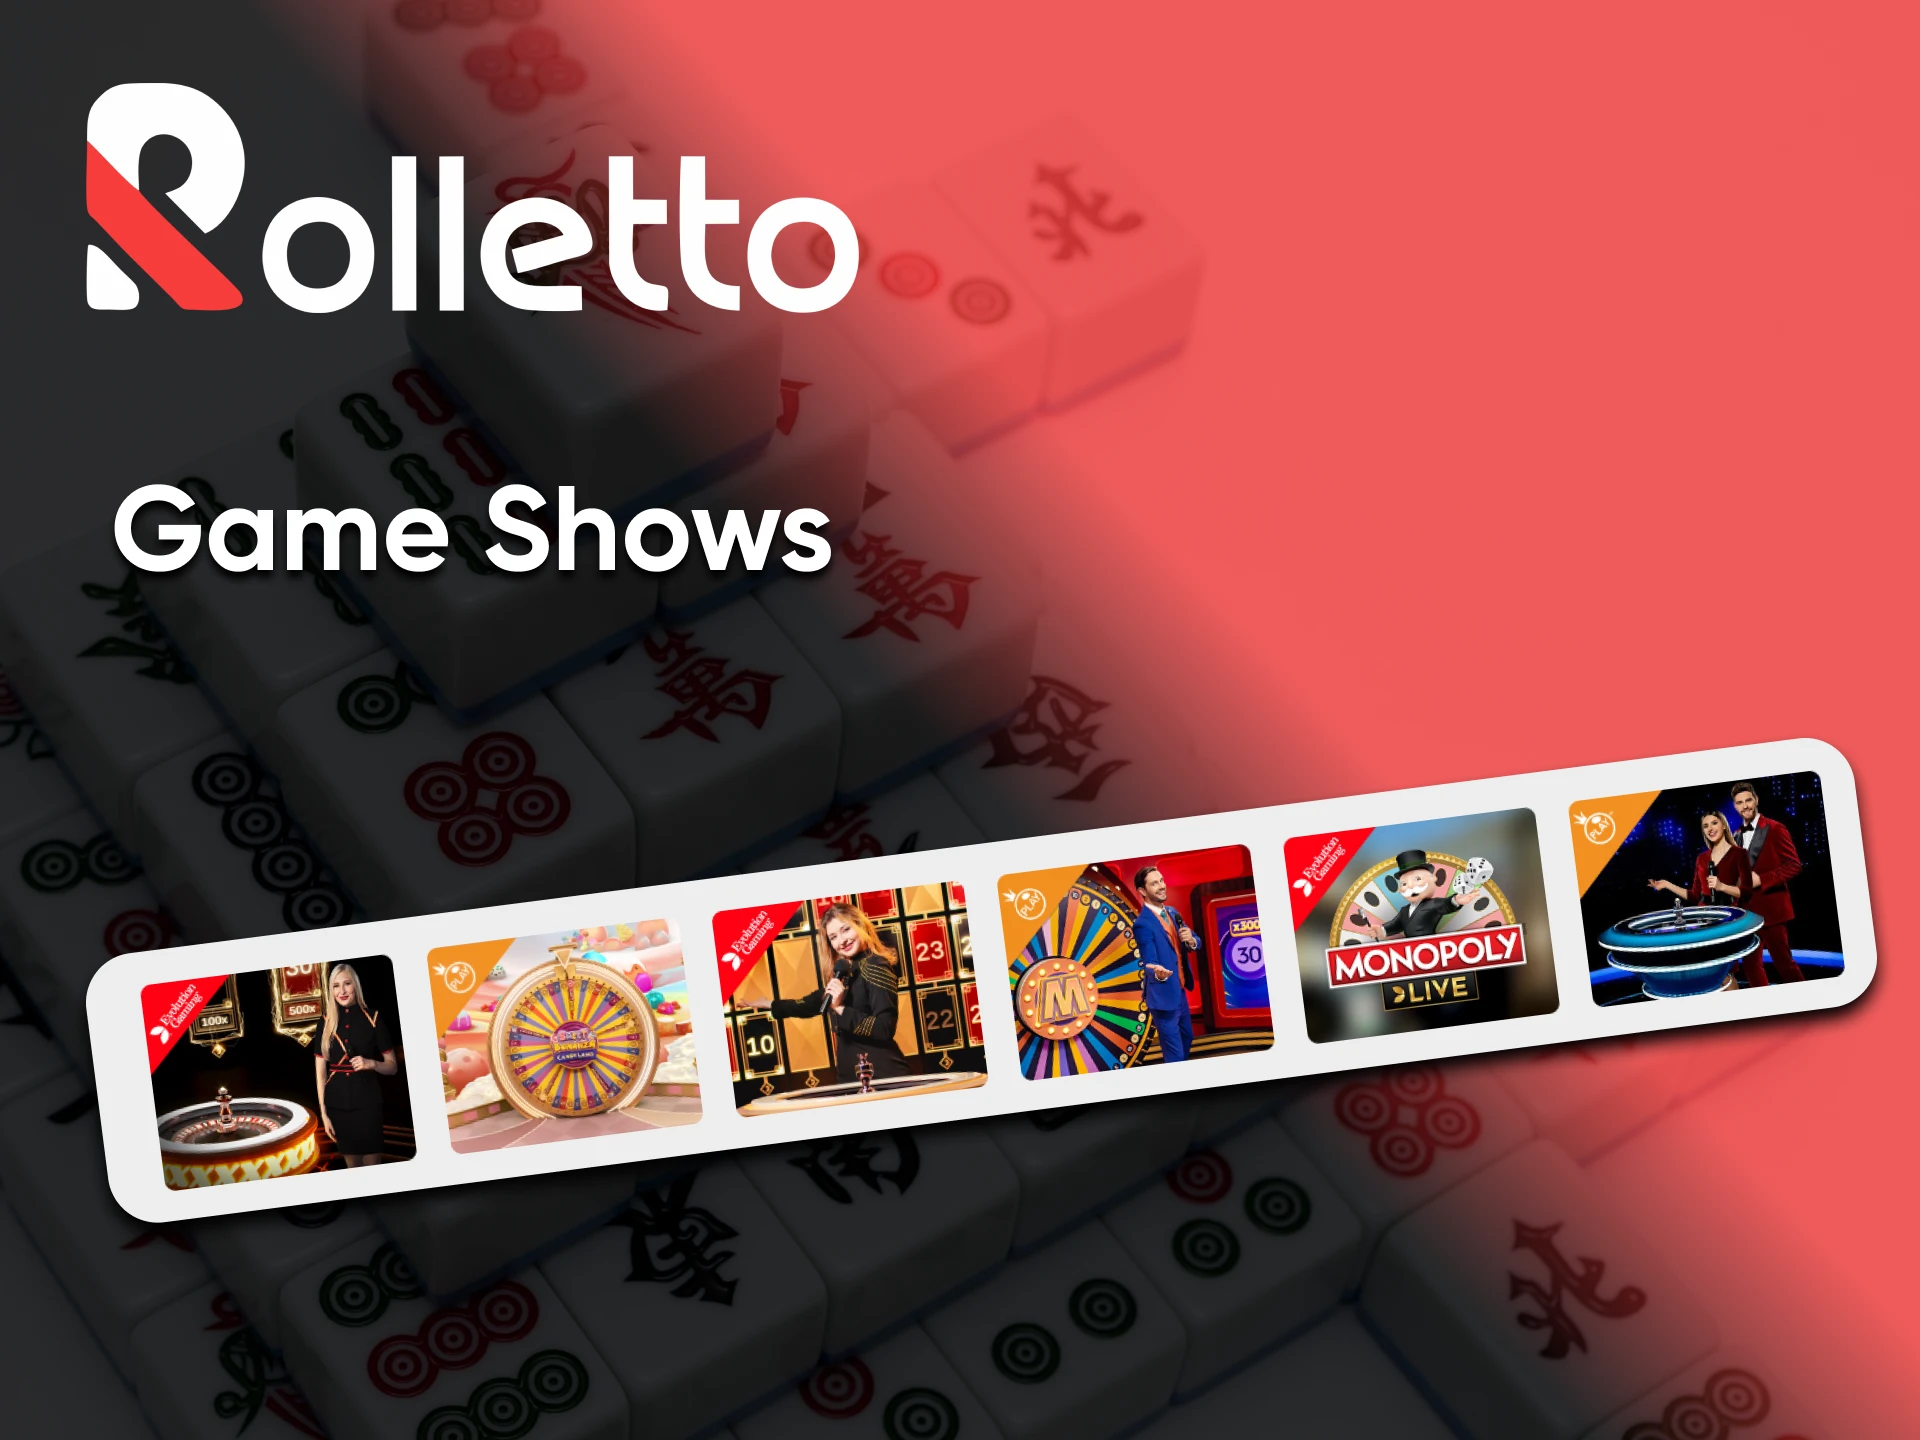 To play Game Show, go to the special section of the Rolletto website.